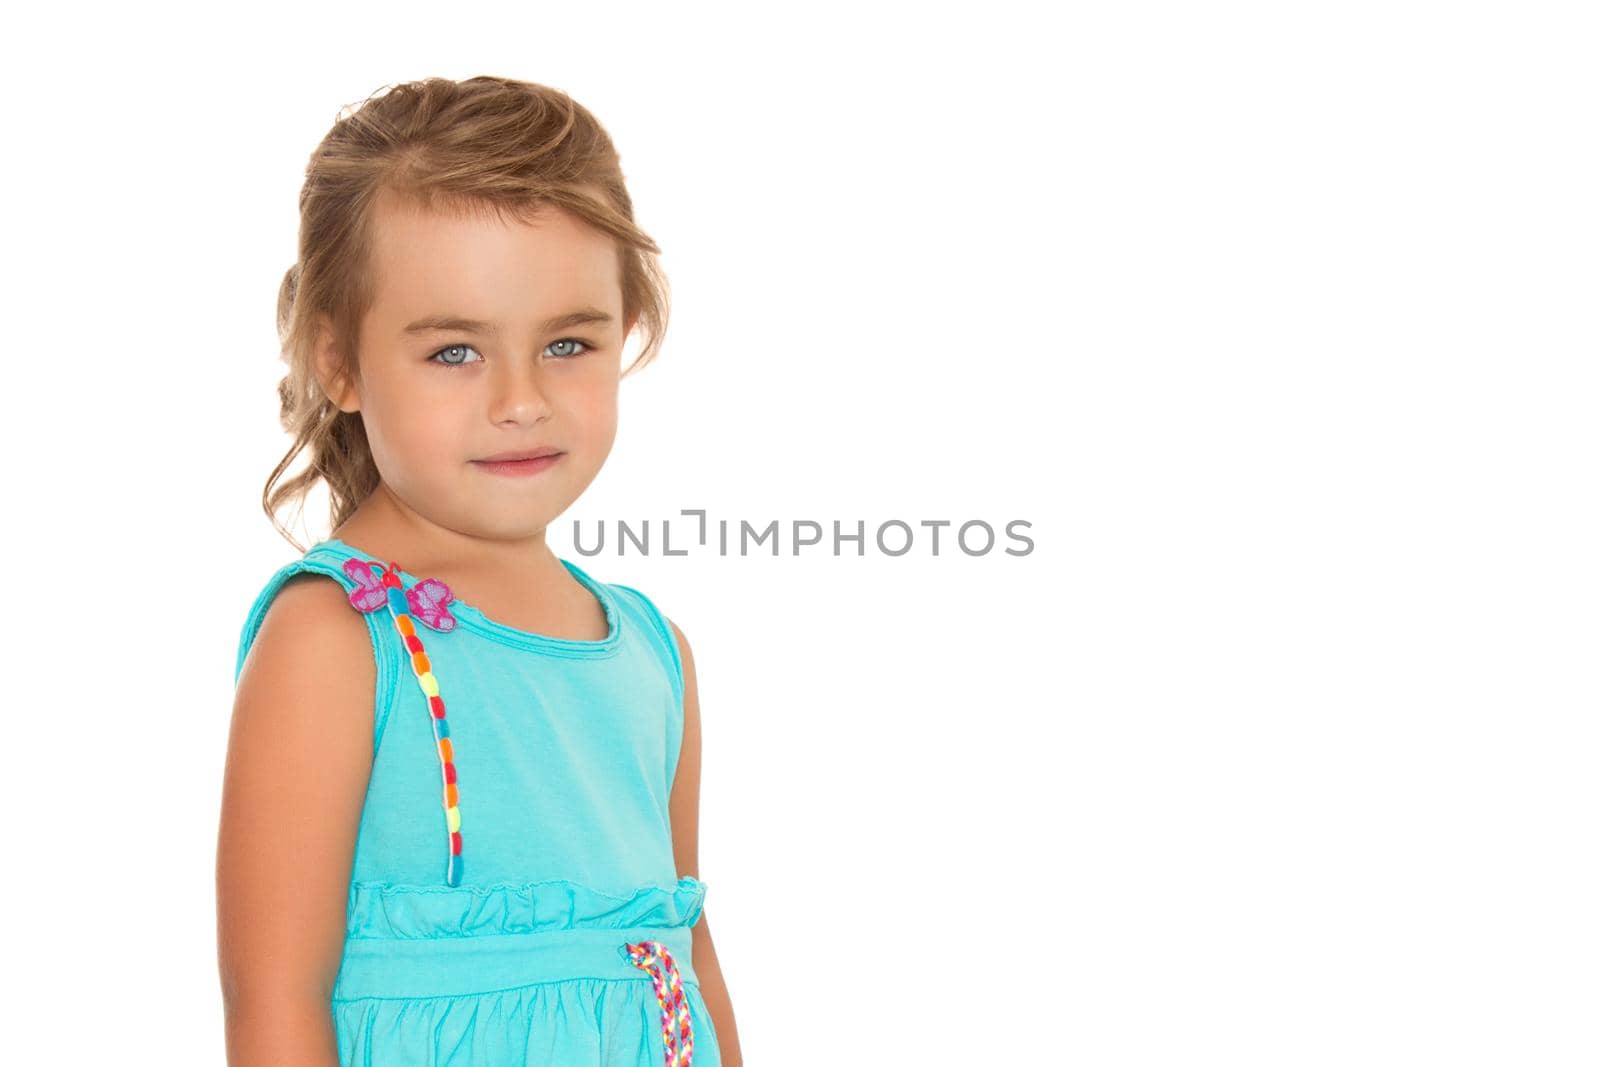 Gentle little girl with beautiful grey eyes . In the summer blue dress. Takes a step forward - Isolated on white background